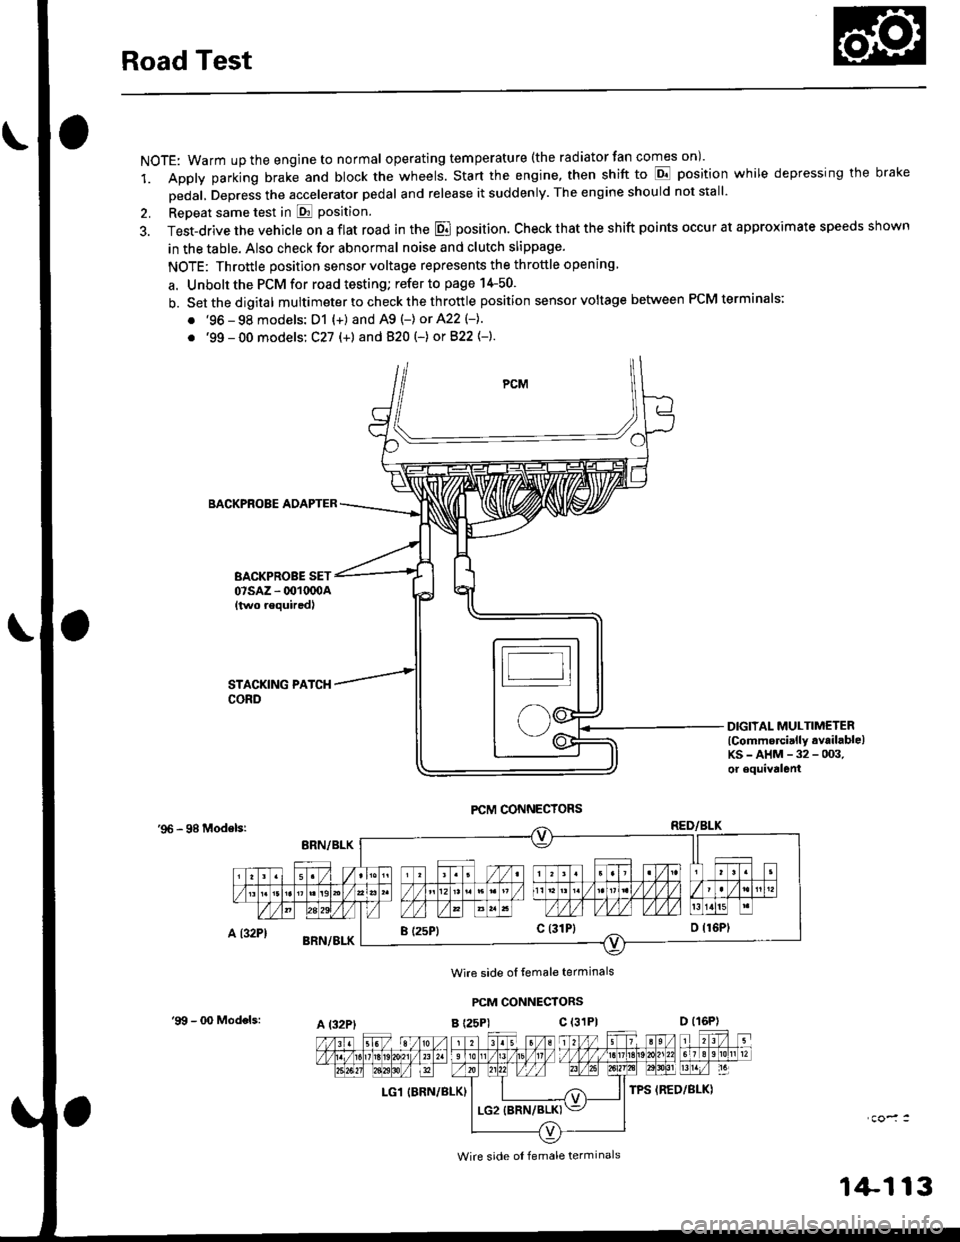 HONDA CIVIC 1996 6.G User Guide Road Test
NOTE: Warm up the engine to normal operating tem peratu re (the rad iator fan comes on )
1. Apply parking brake and block the wheels. Start the engine, then shift to E position while depres